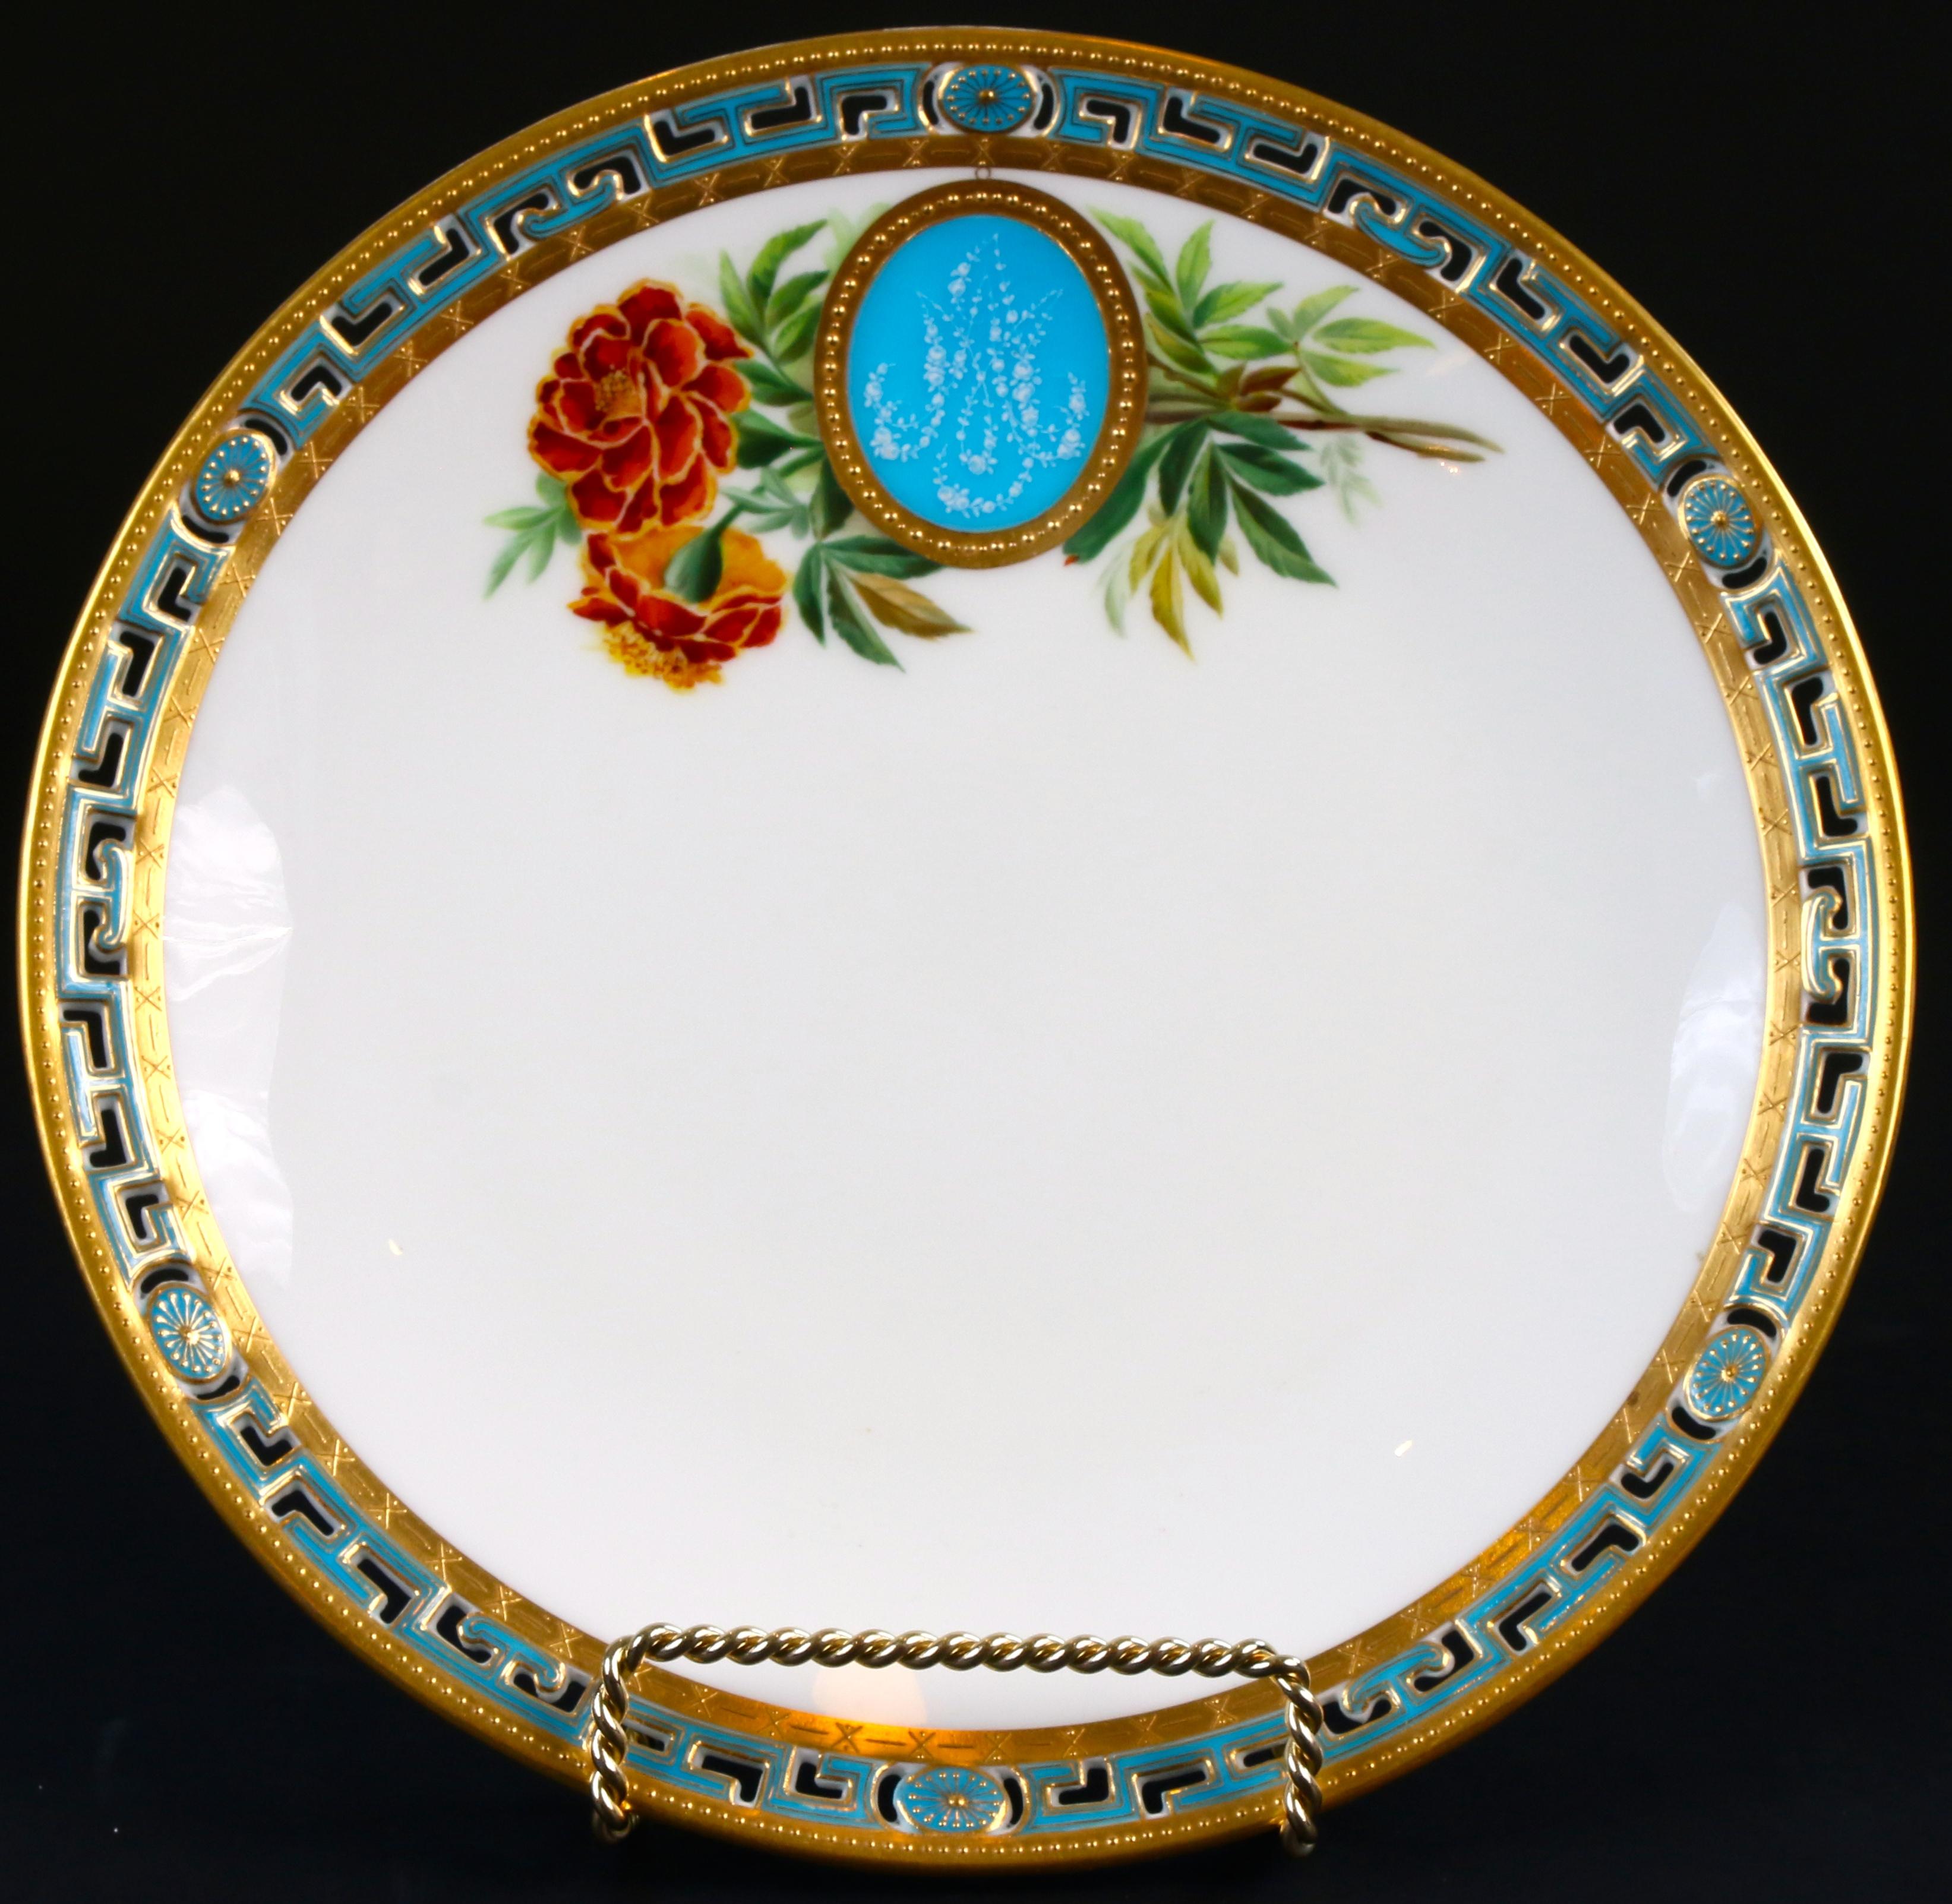 11 Antique Minton Pate-Sur-Pate Hand Painted Floral Plates In Good Condition For Sale In New York, NY